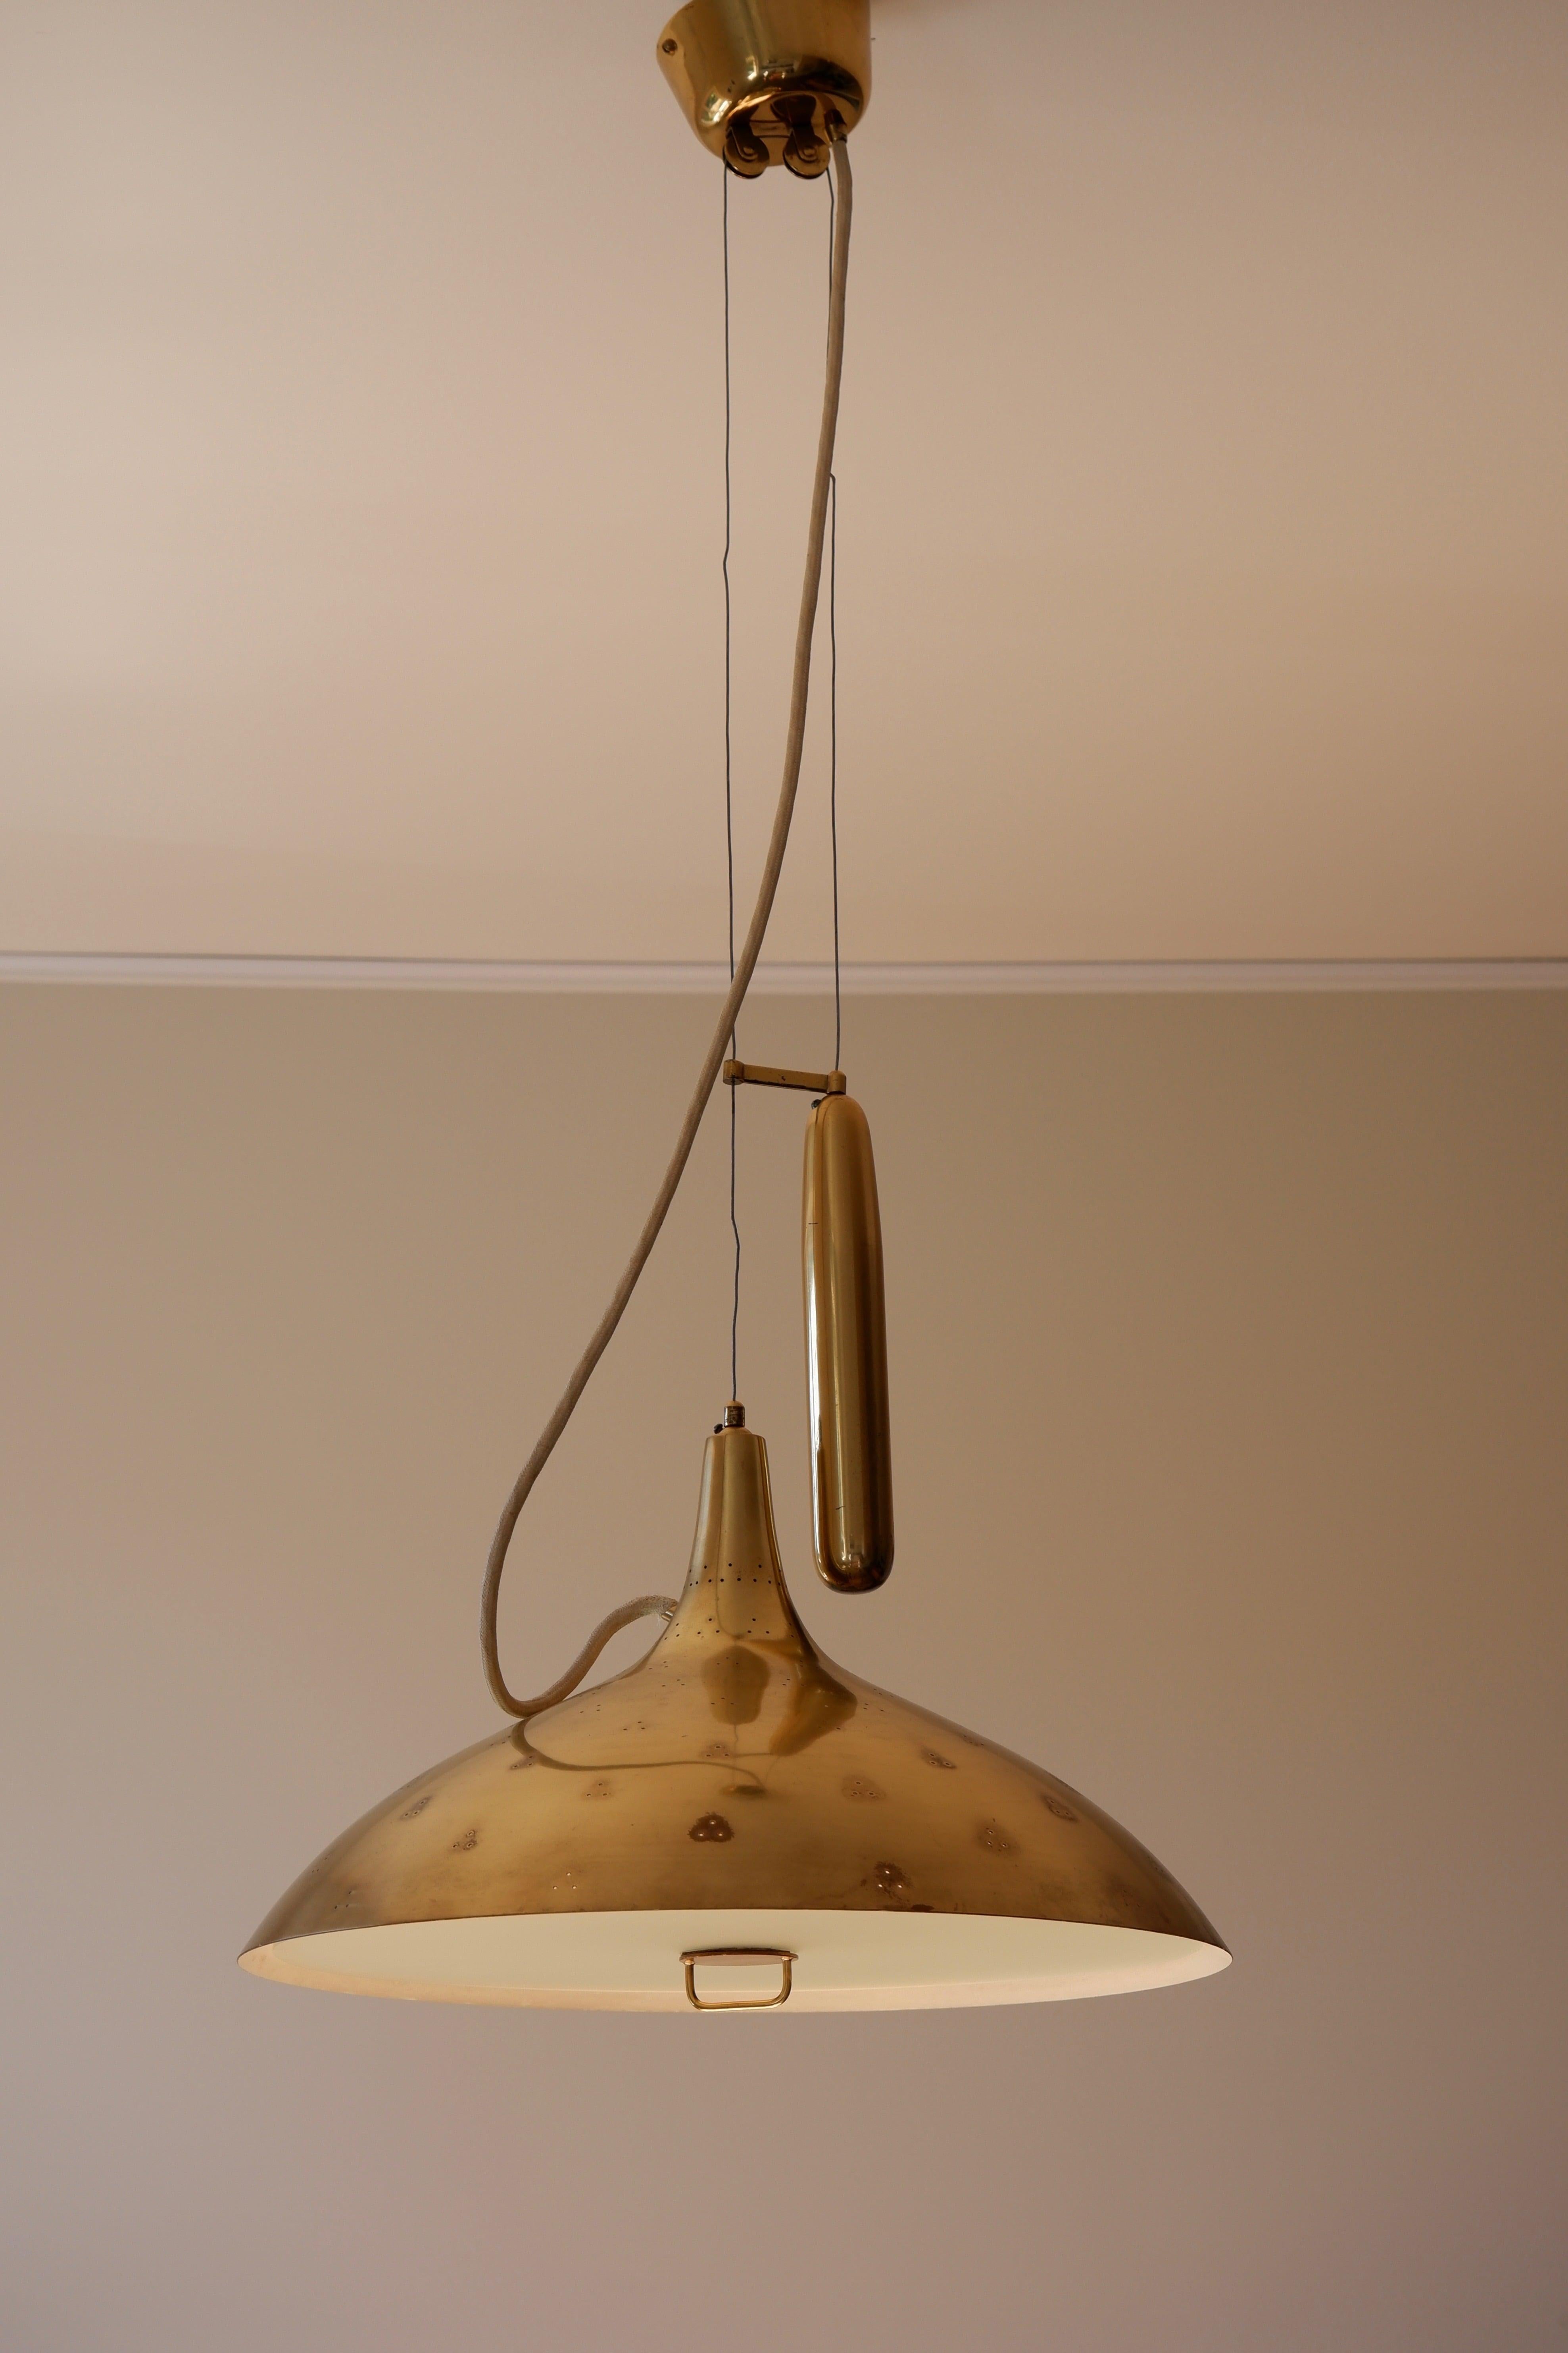 Finnish Paavo Tynell Adjustable Counterweight Ceiling Lamp Model A1965, Taito, circa 40